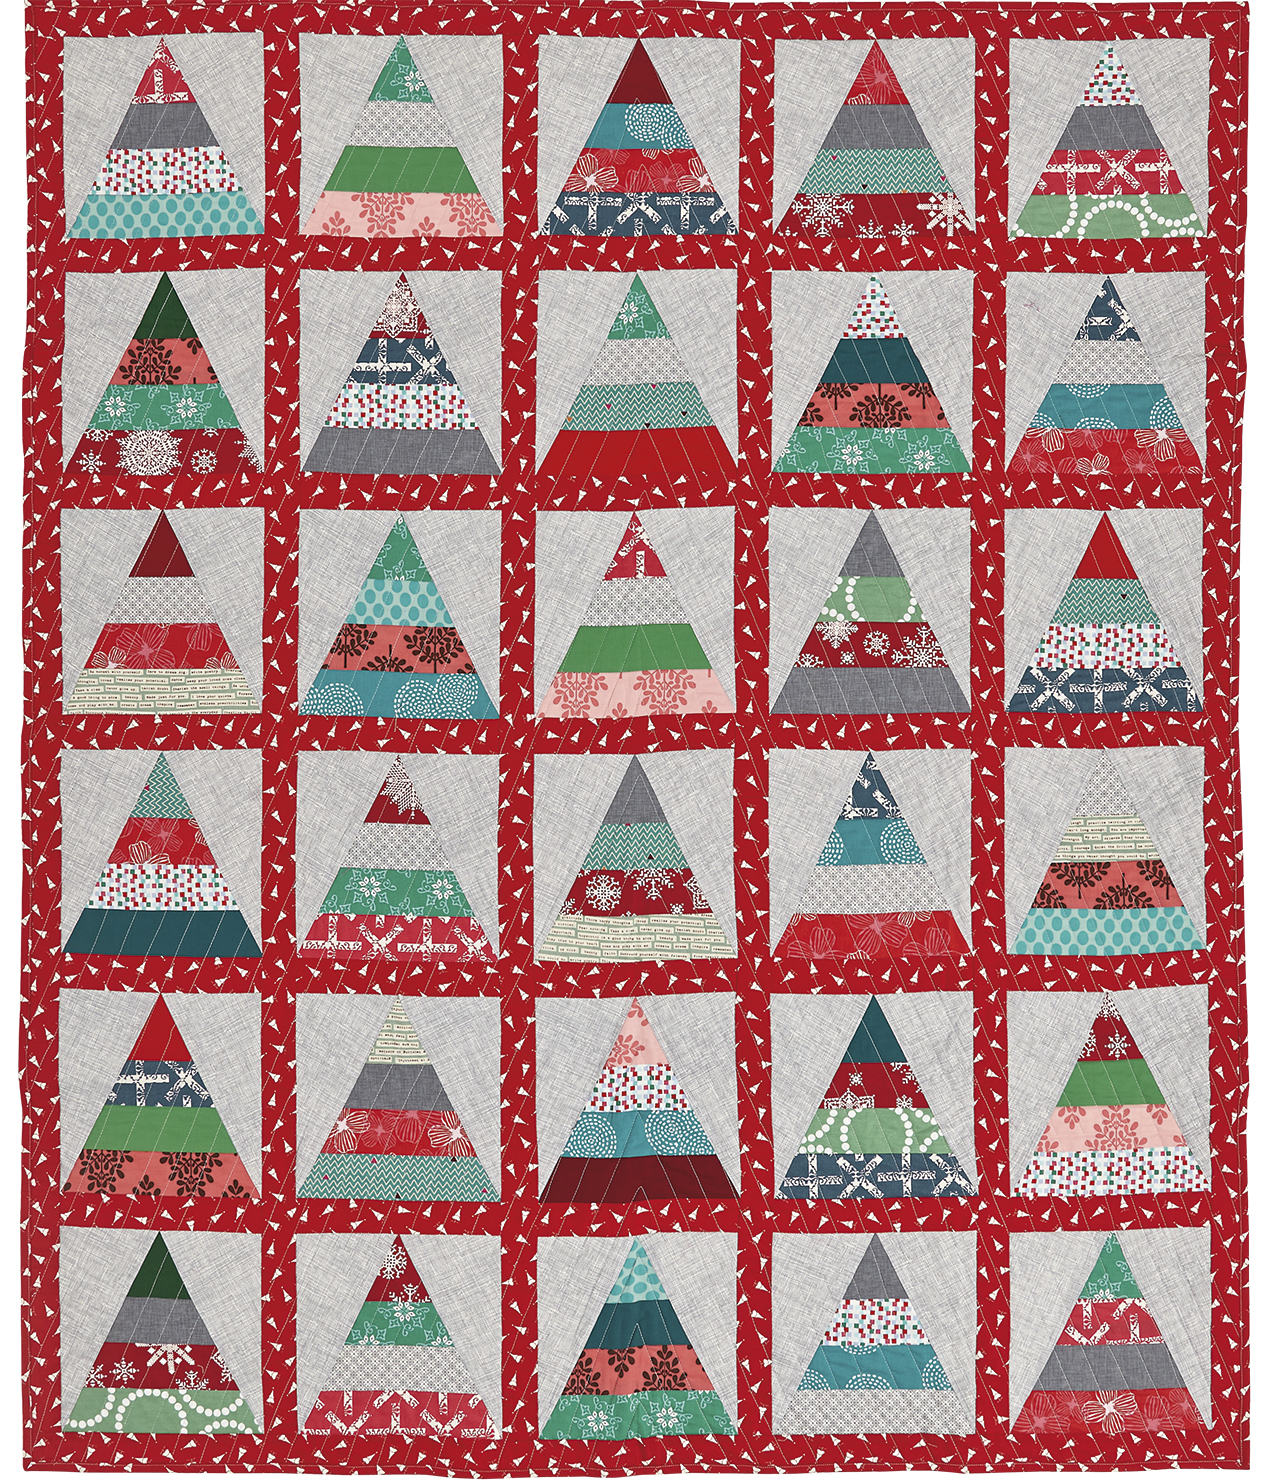 Free Christmas Tree quilt pattern